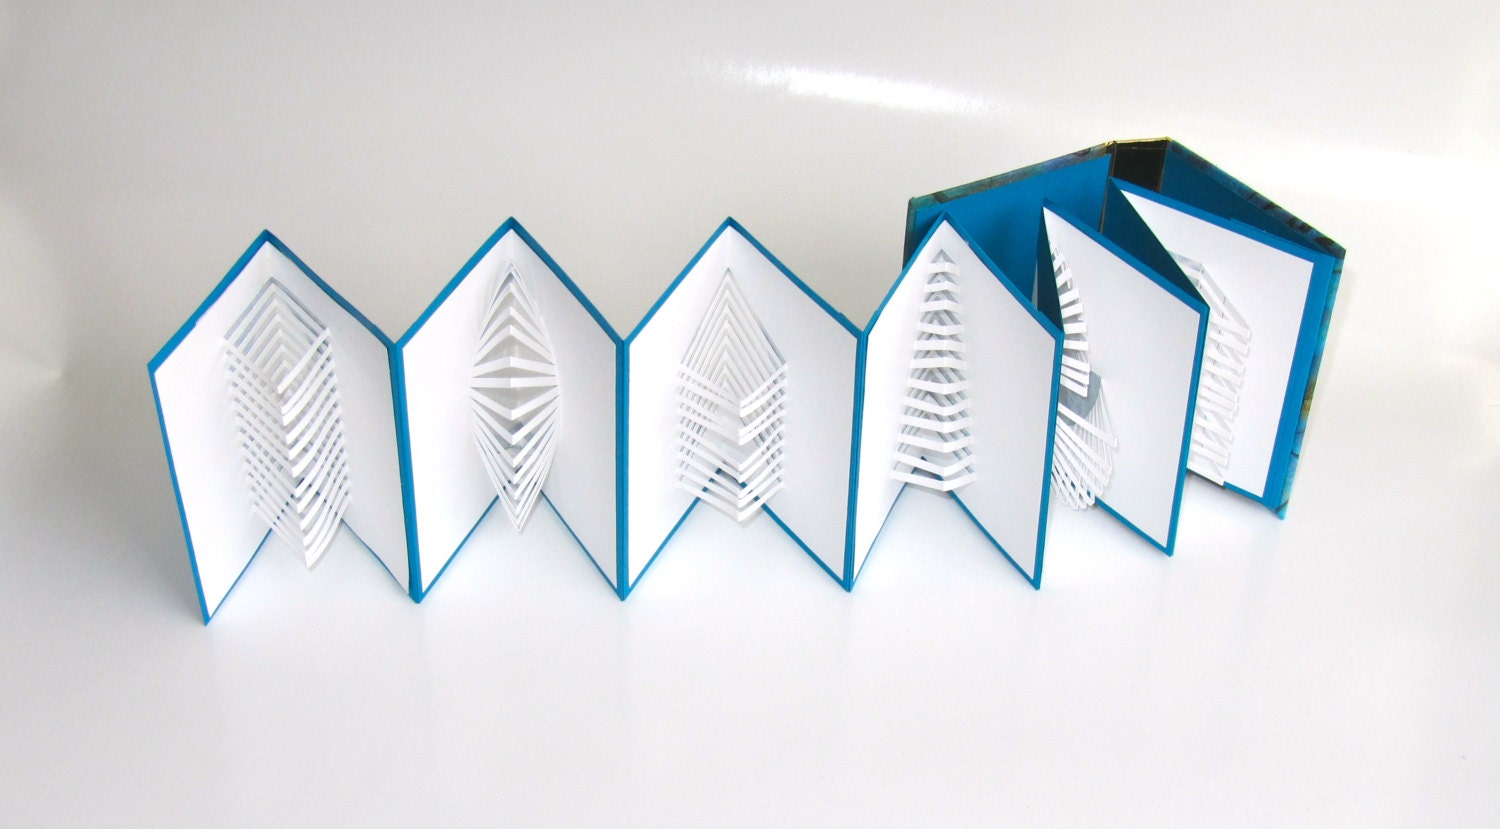 POP UP ACCORDION BOOk w/Hard Cover Binding Original Hand Cut Six Origamic Architecture Sculptures Home Decor In White, Blue and Gold OOaK - BoldFolds